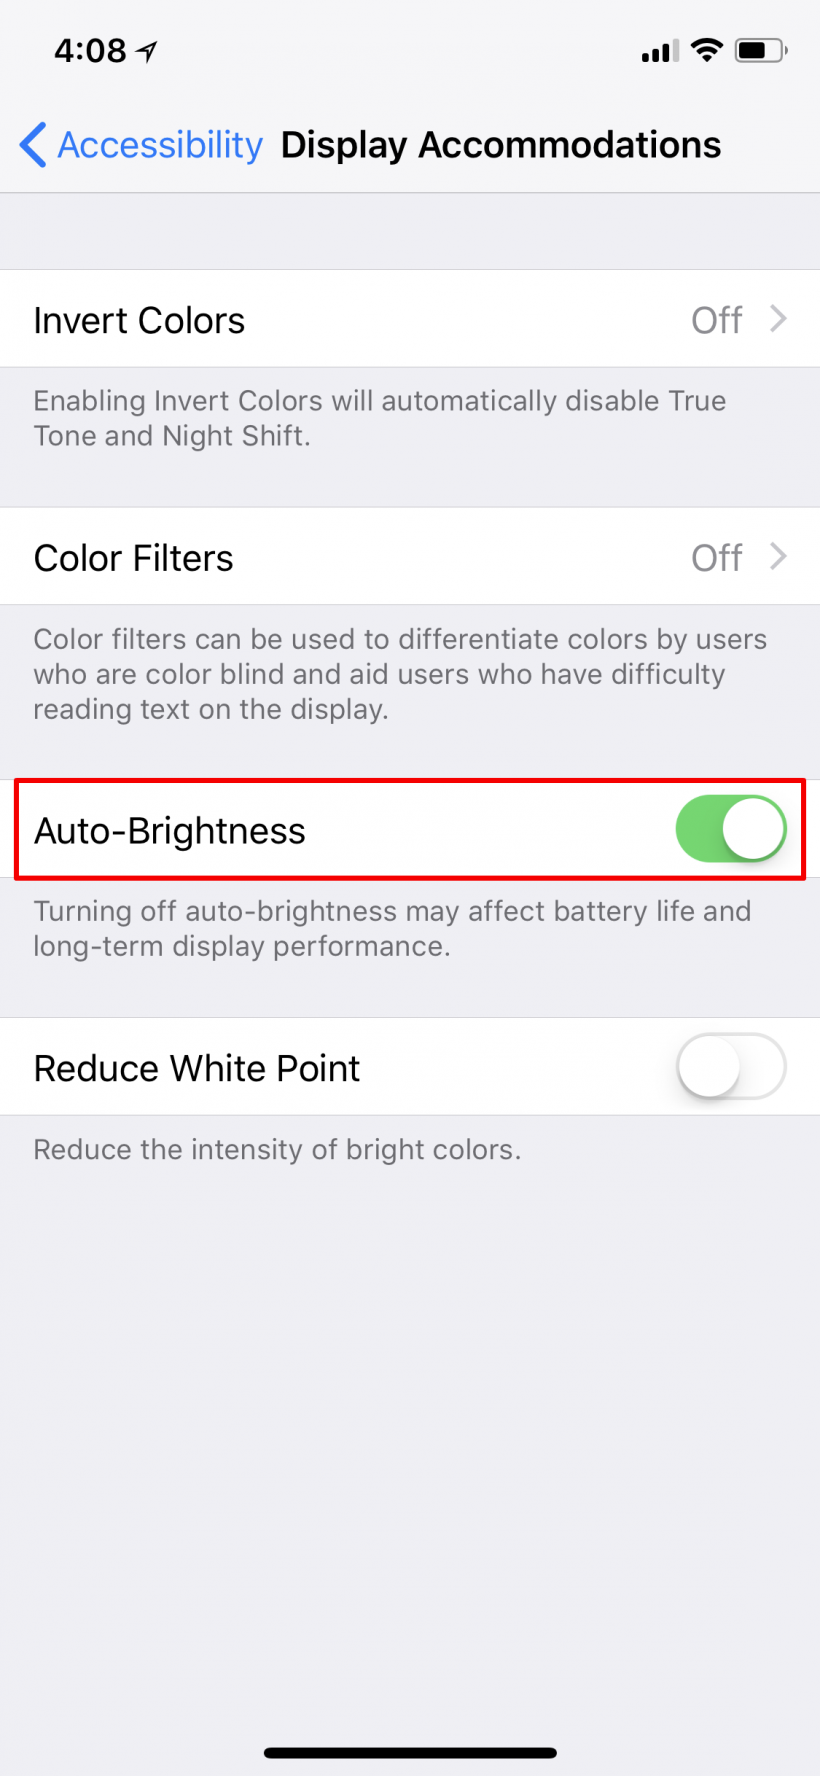 How to turn Auto-Brightness on or off in iOS 11 on iPhone and iPad.